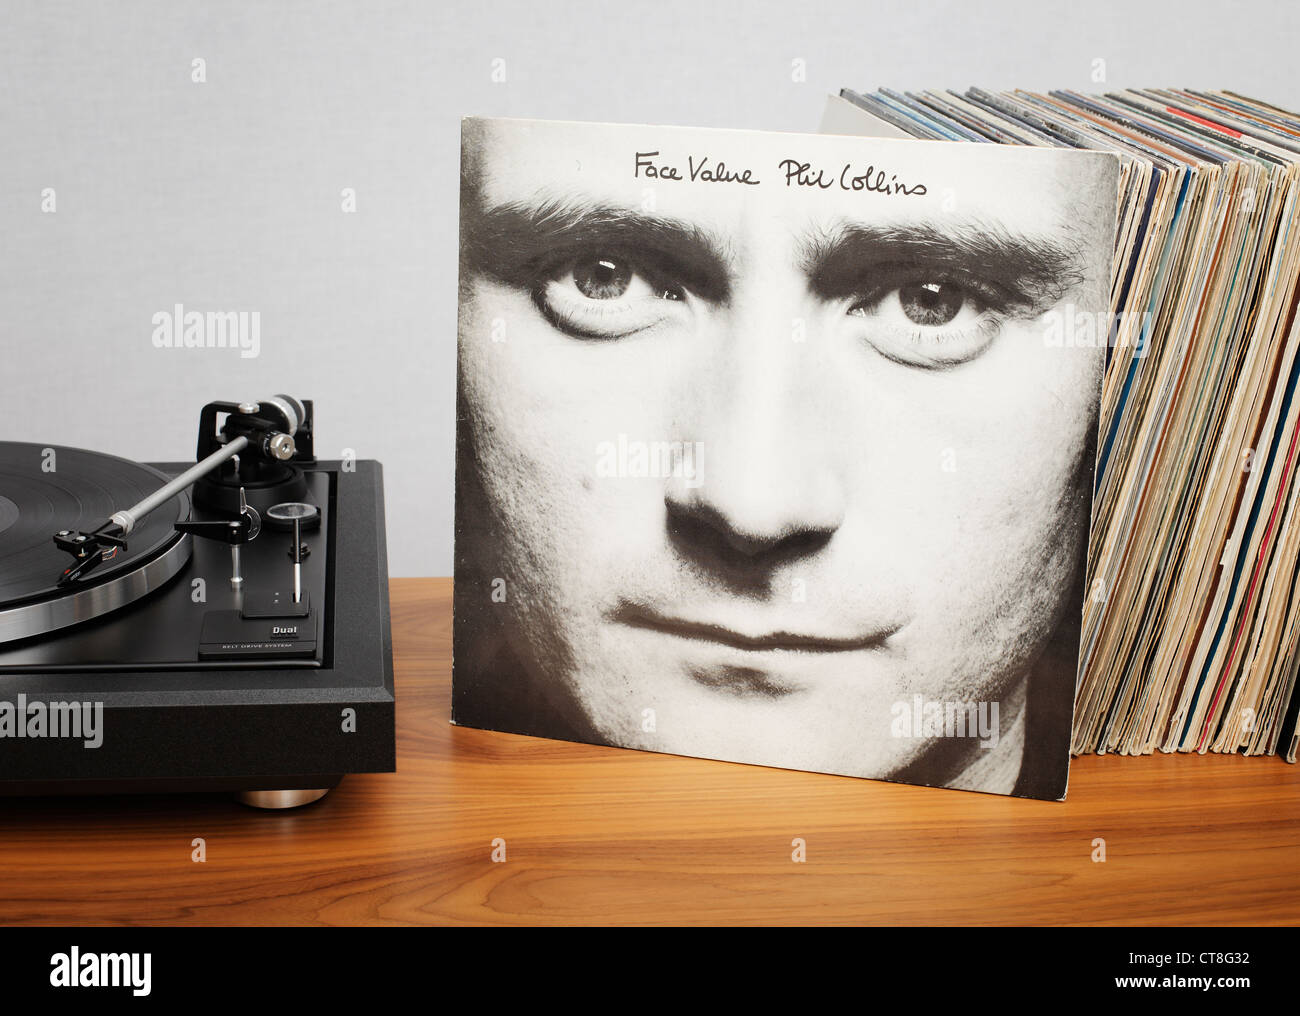 Face Value is the debut solo album by Genesis front man Phil Collins, released in February 1981. Stock Photo